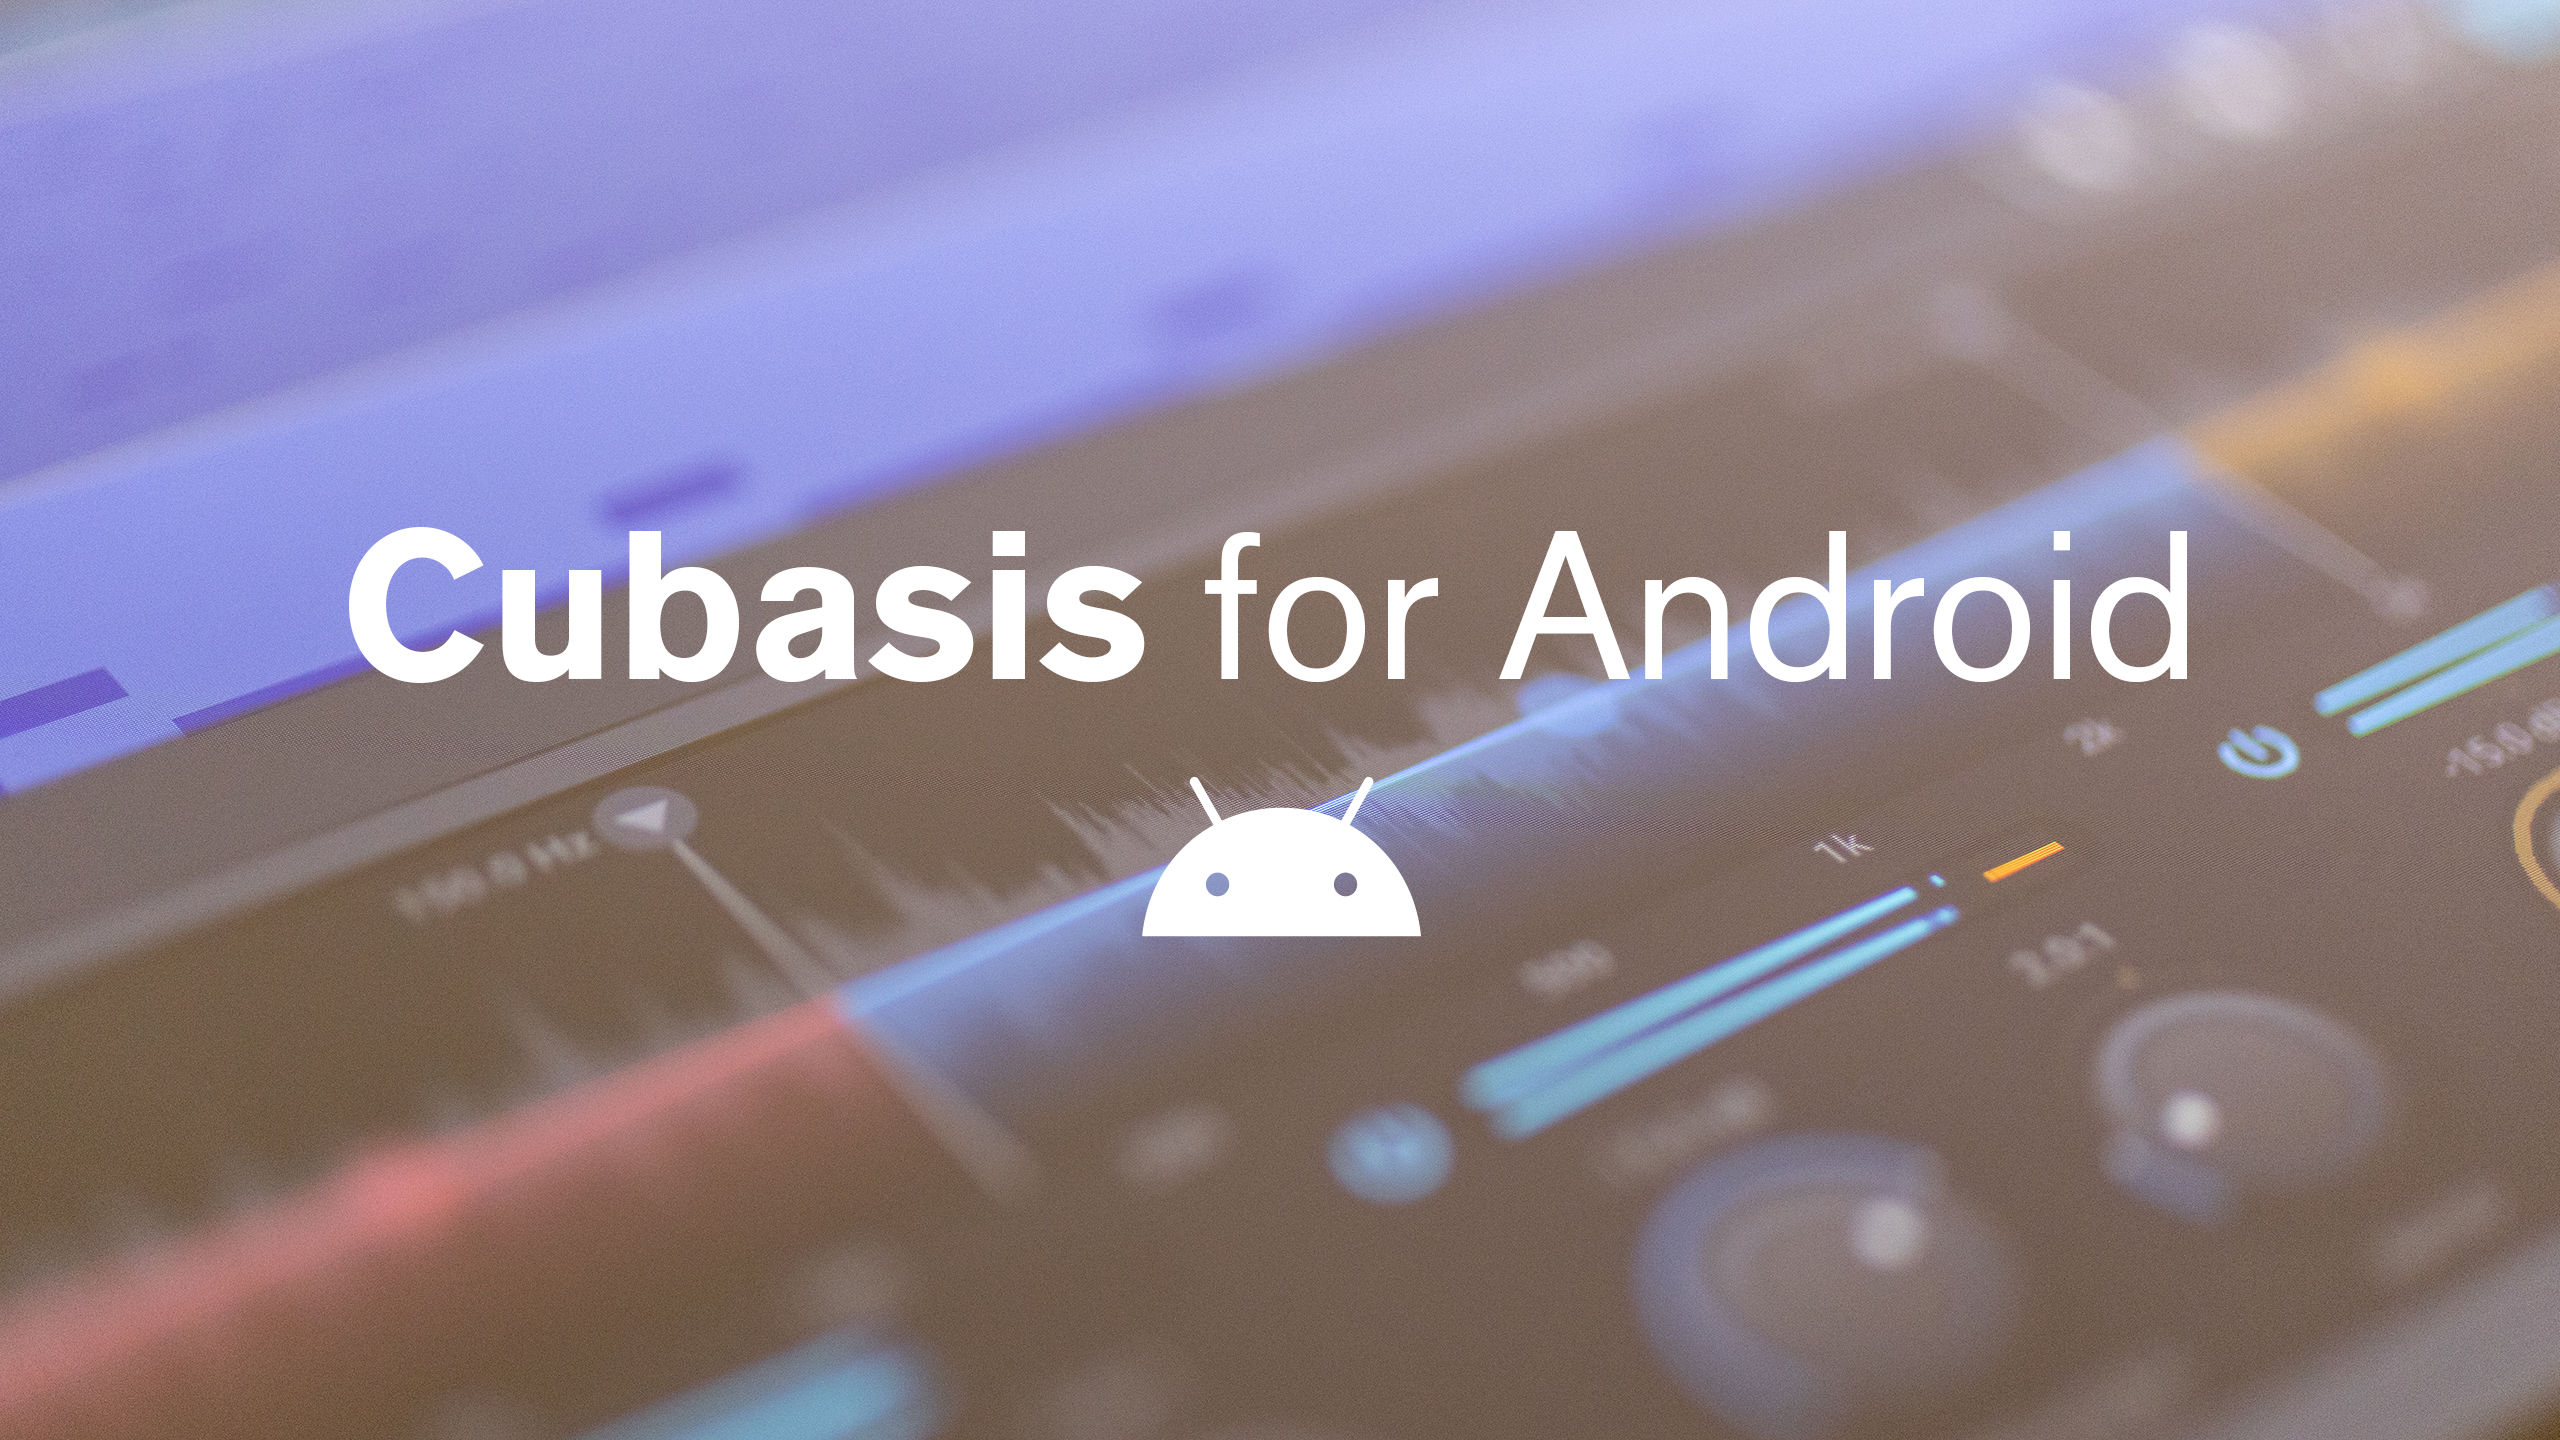 Cubasis 3 mobile DAW launches on Android